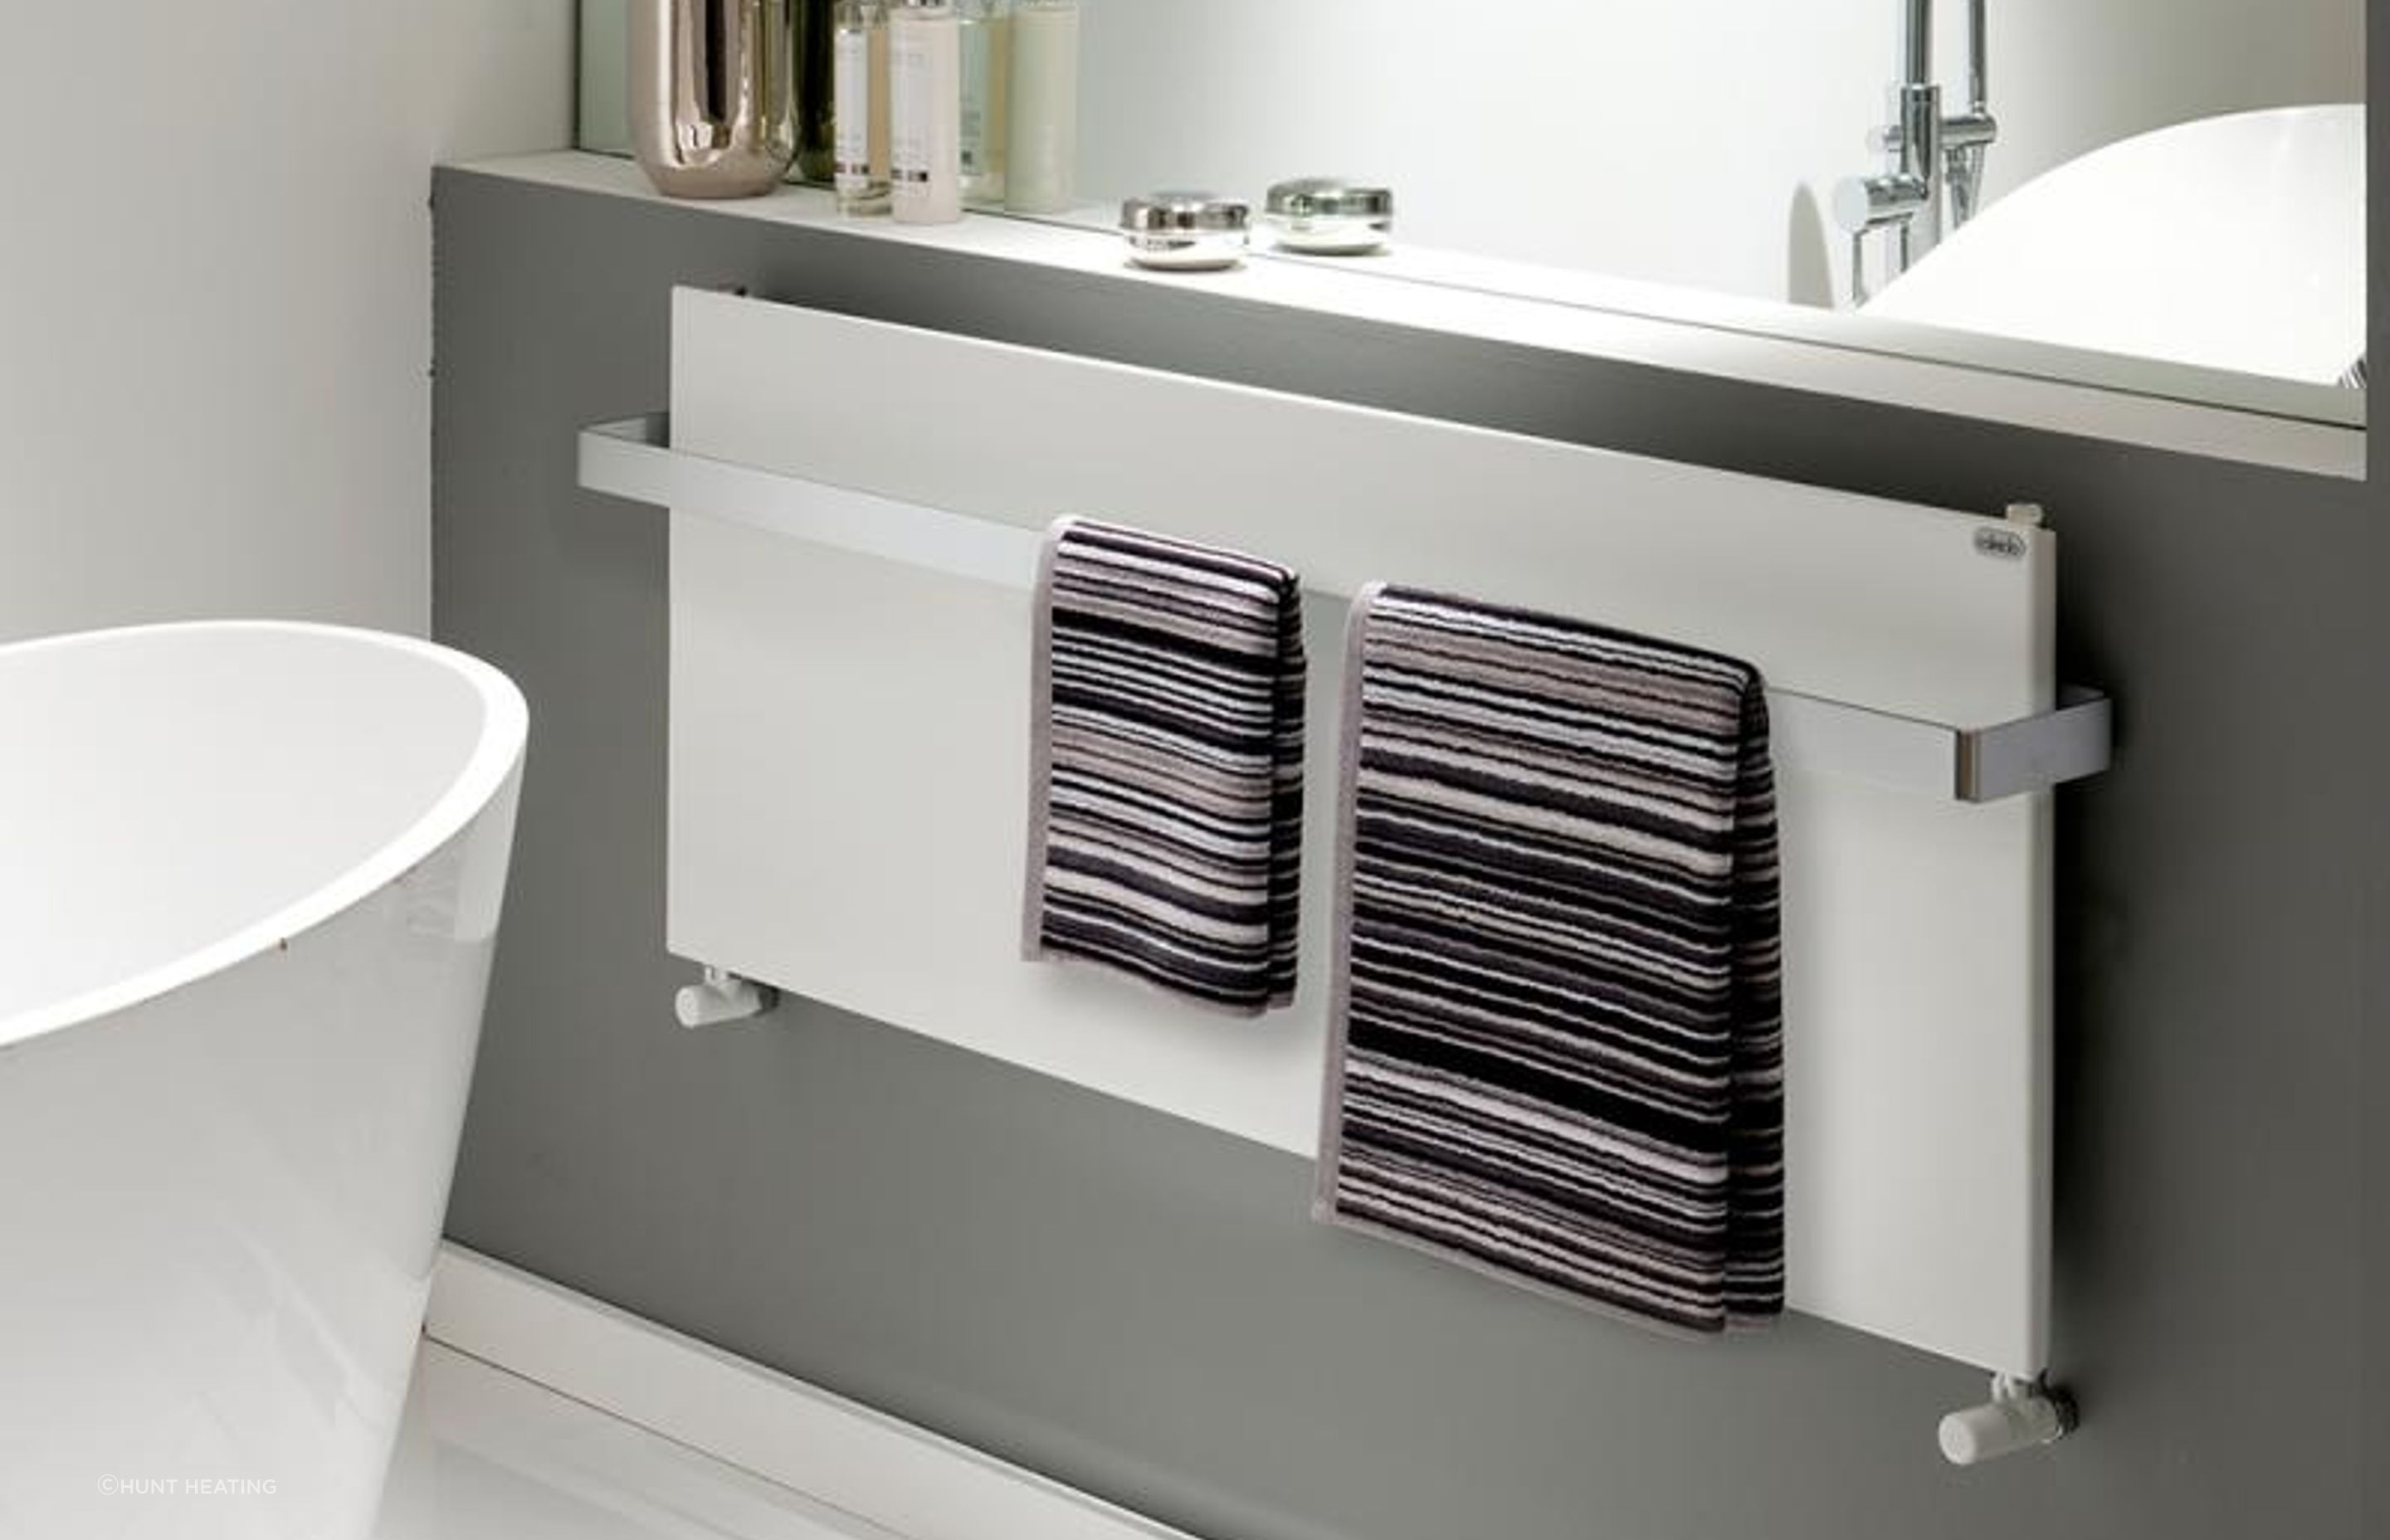 Matching towels on an Ice Bagno heated towel rail.